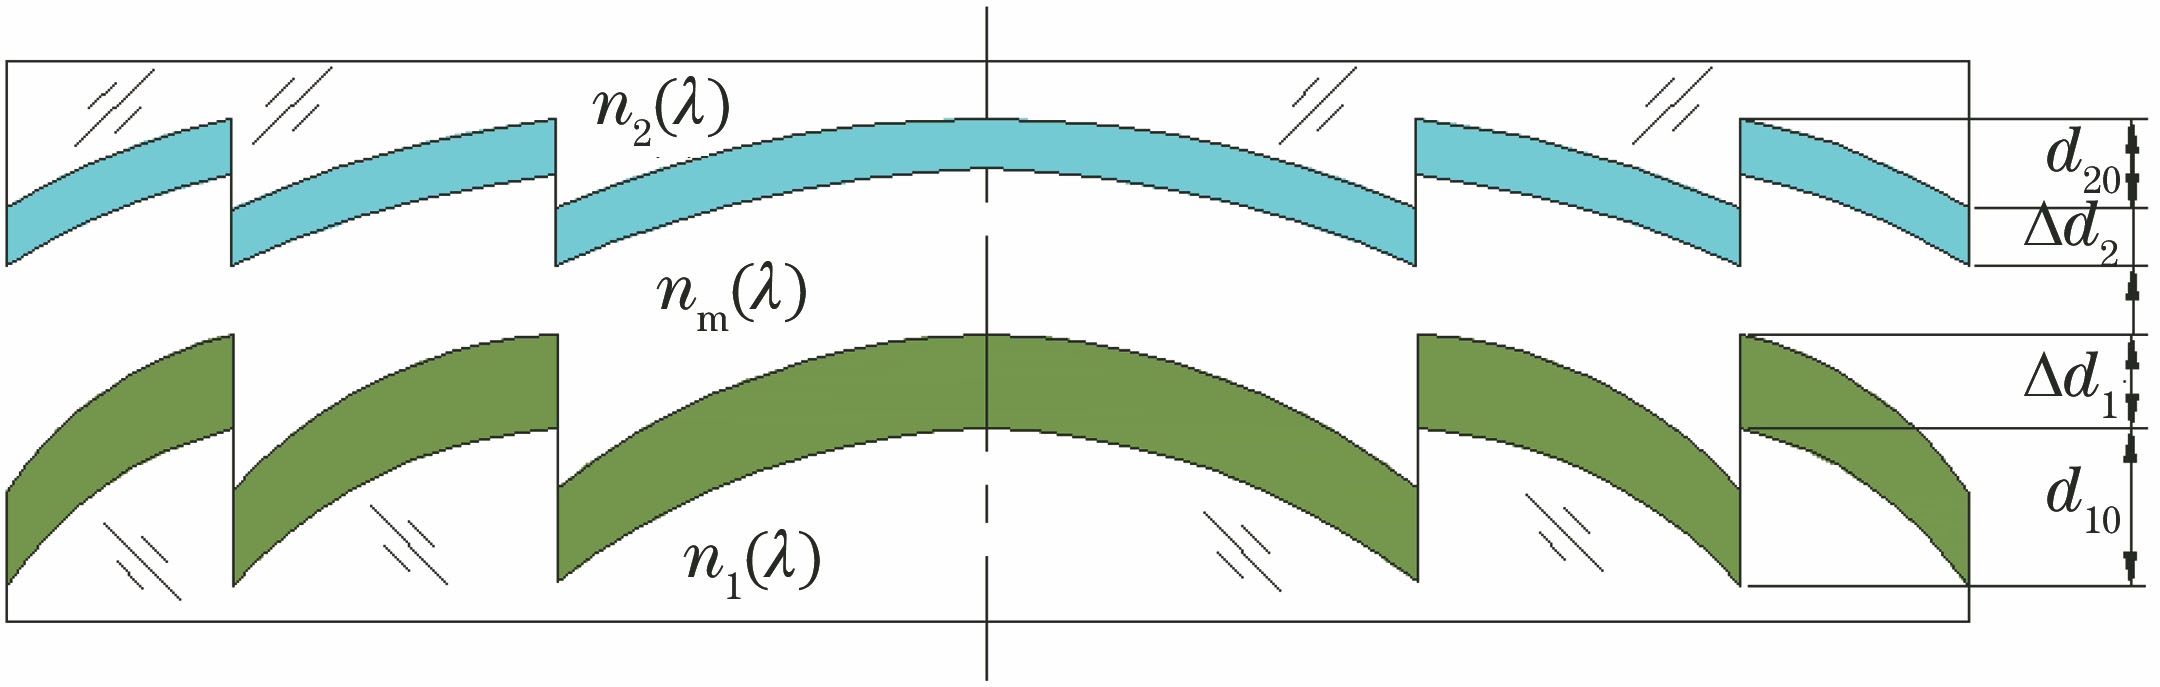 Structure of multilayer DOEs with antireflection coatings